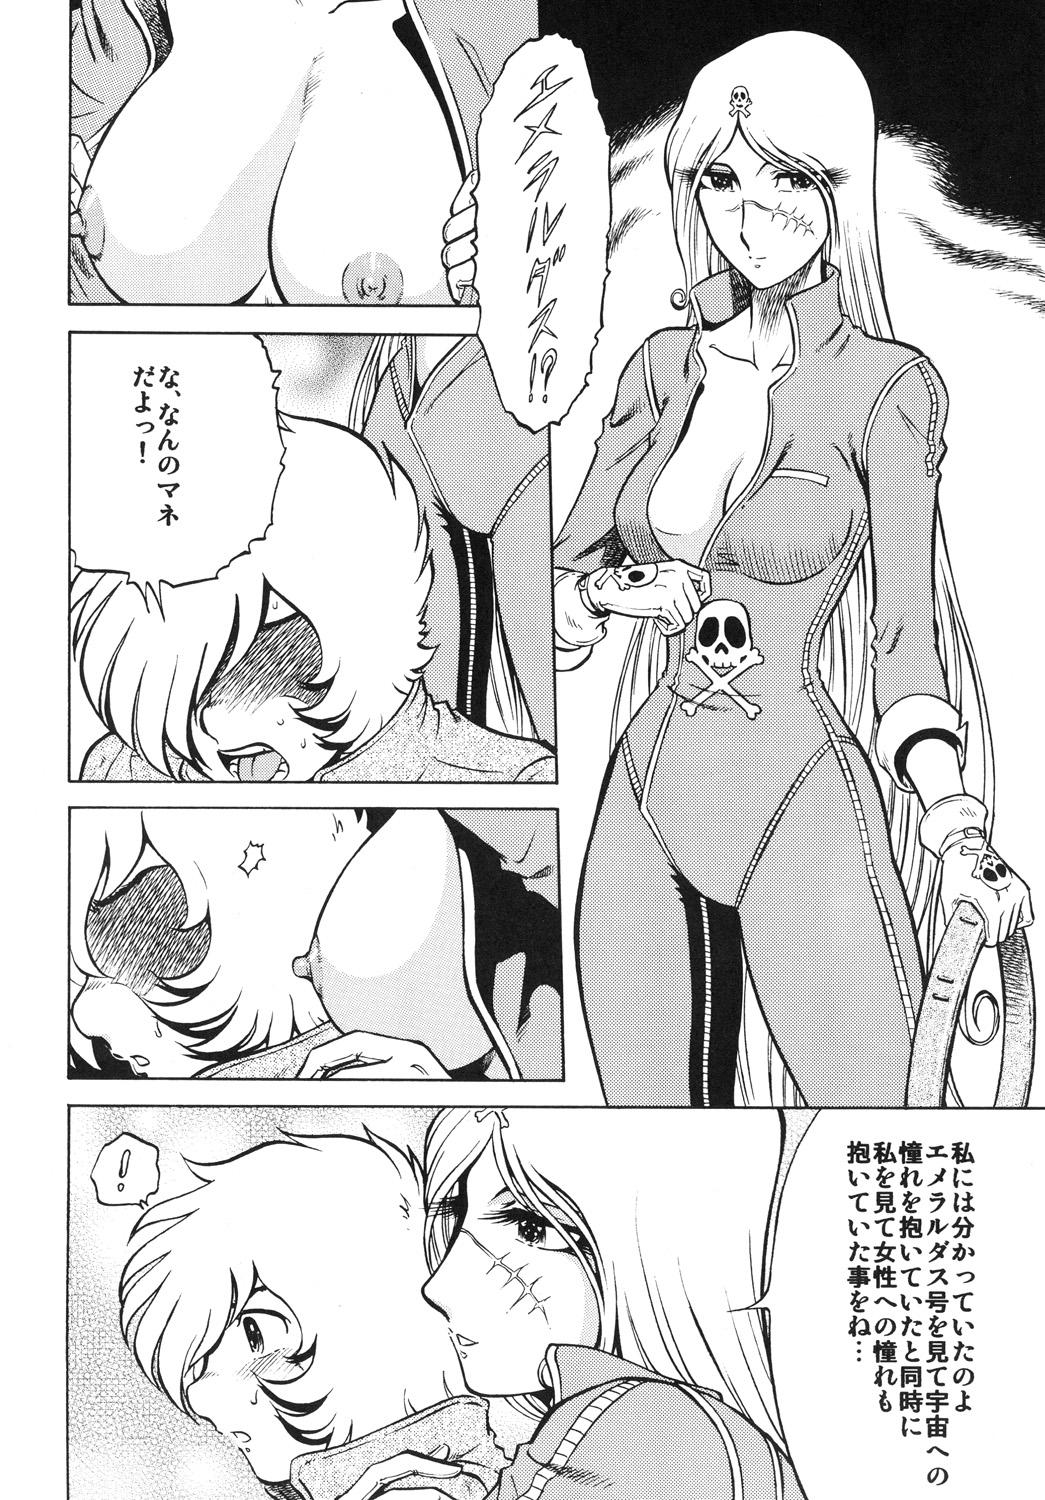 French NightHead+2 - Space pirate captain harlock Bizarre - Page 9